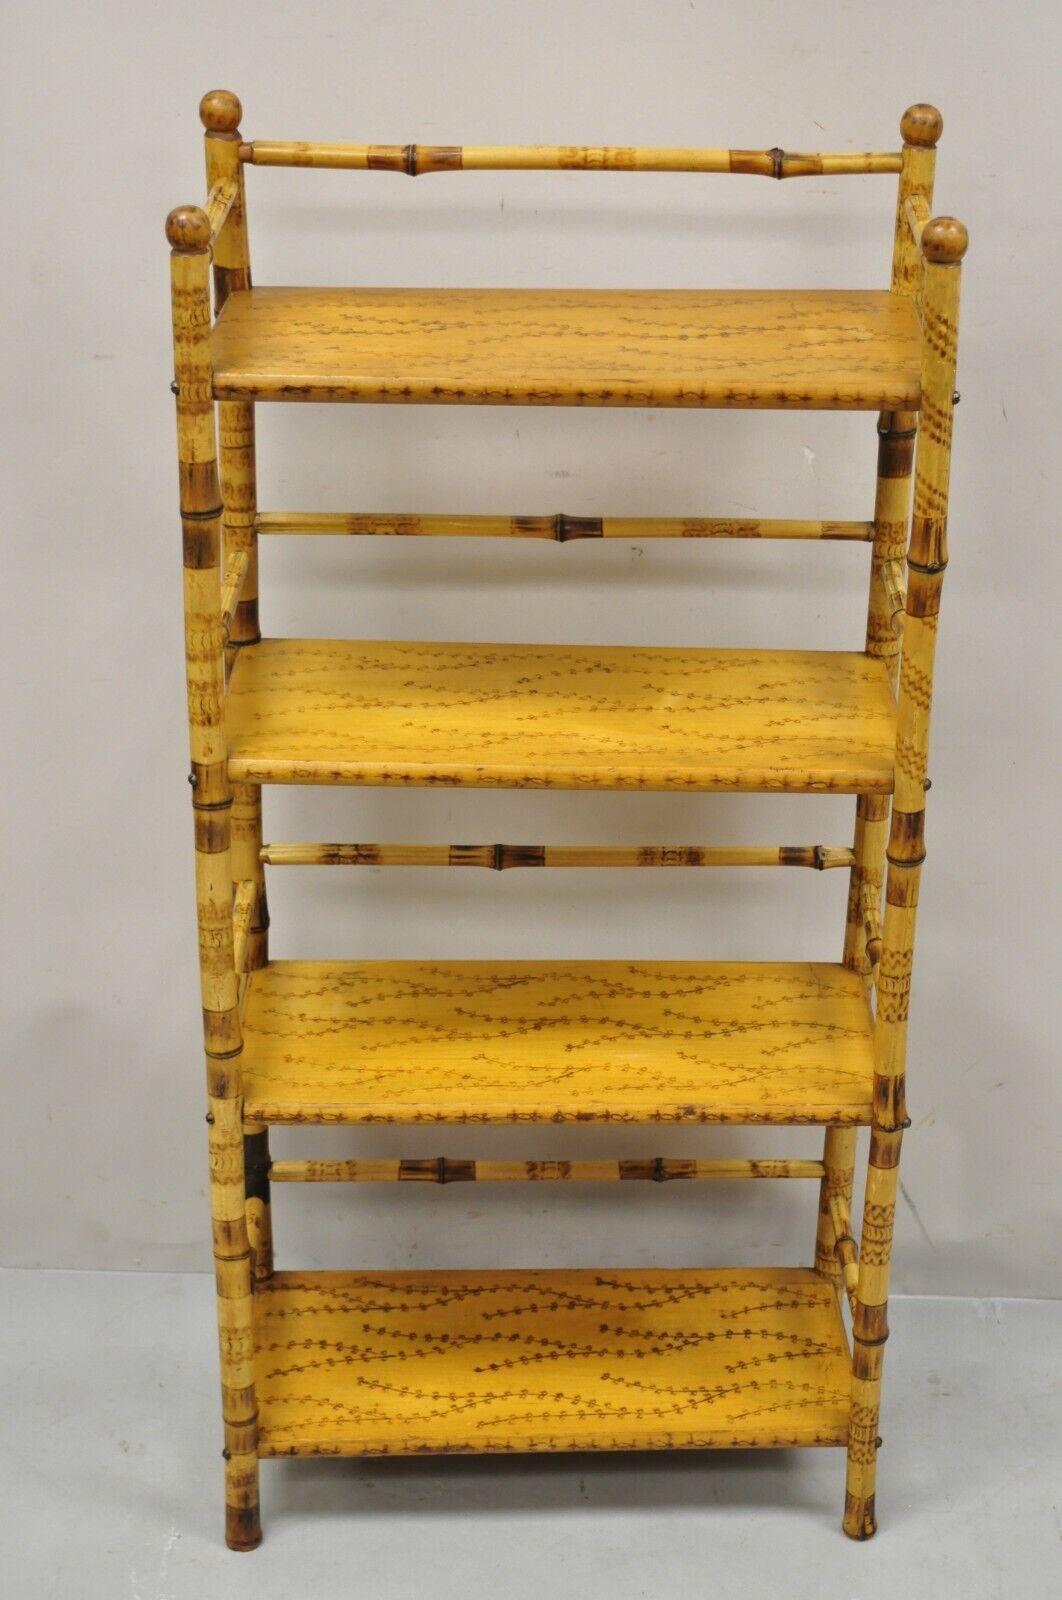 Antique English Victorian bamboo 5 tier whatnot shelf display Stand bookcase. Item features Burn carved decoration, bamboo construction, 4 wooden shelves, very nice antique, quality English craftsmanship. Circa 19th Century. Measurements: 44